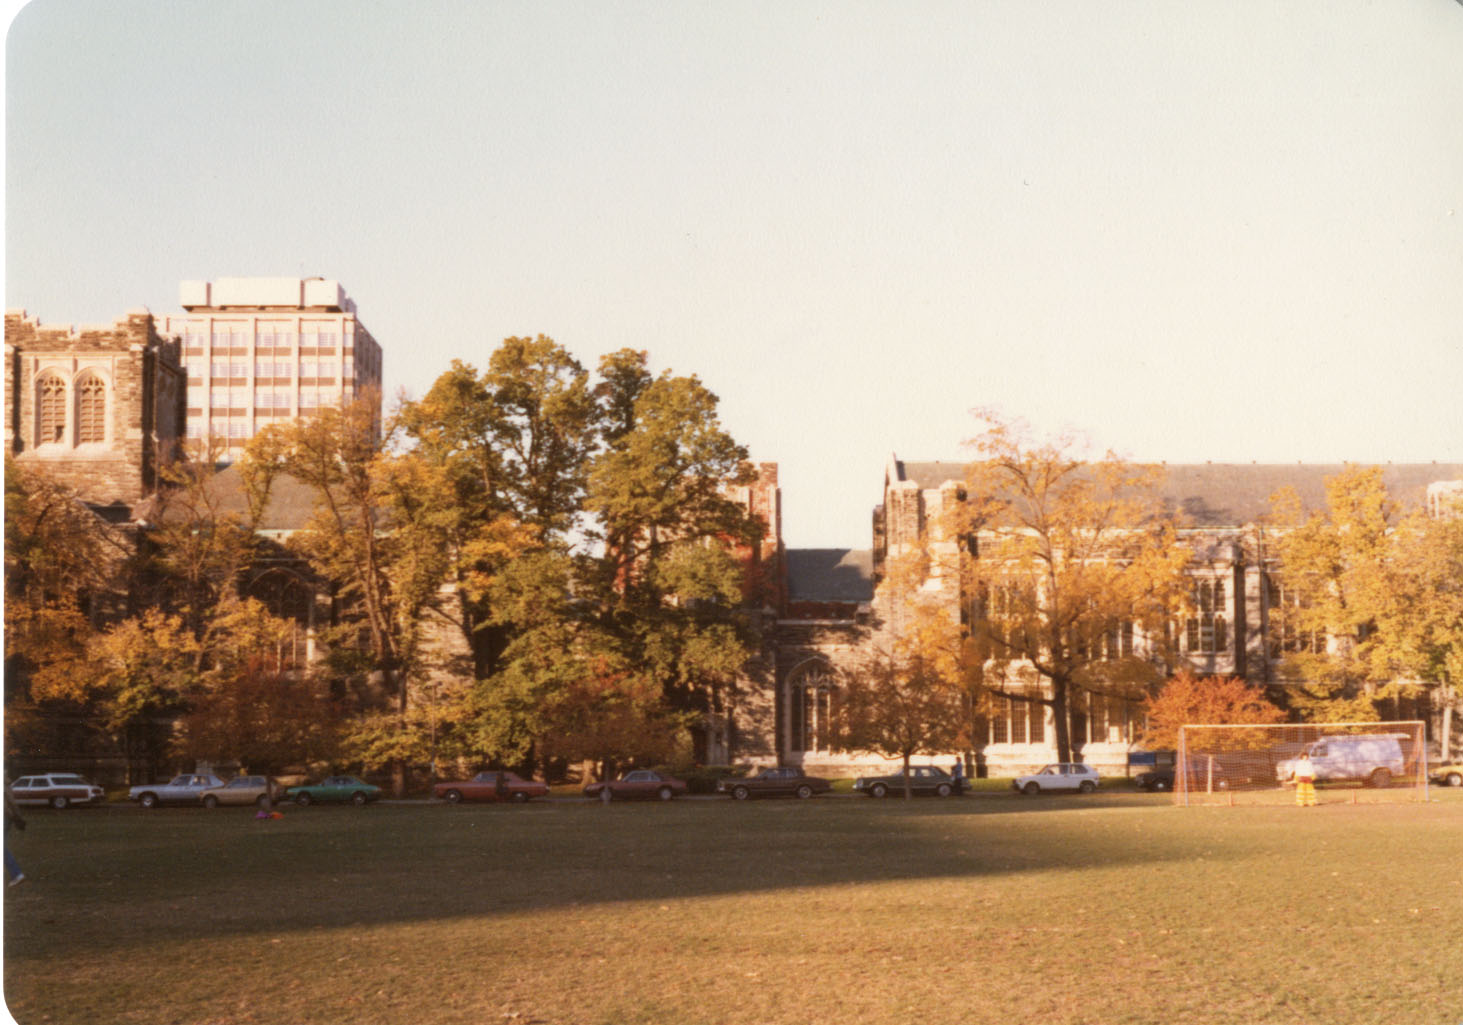 The College from the Lawn on King's College Circle